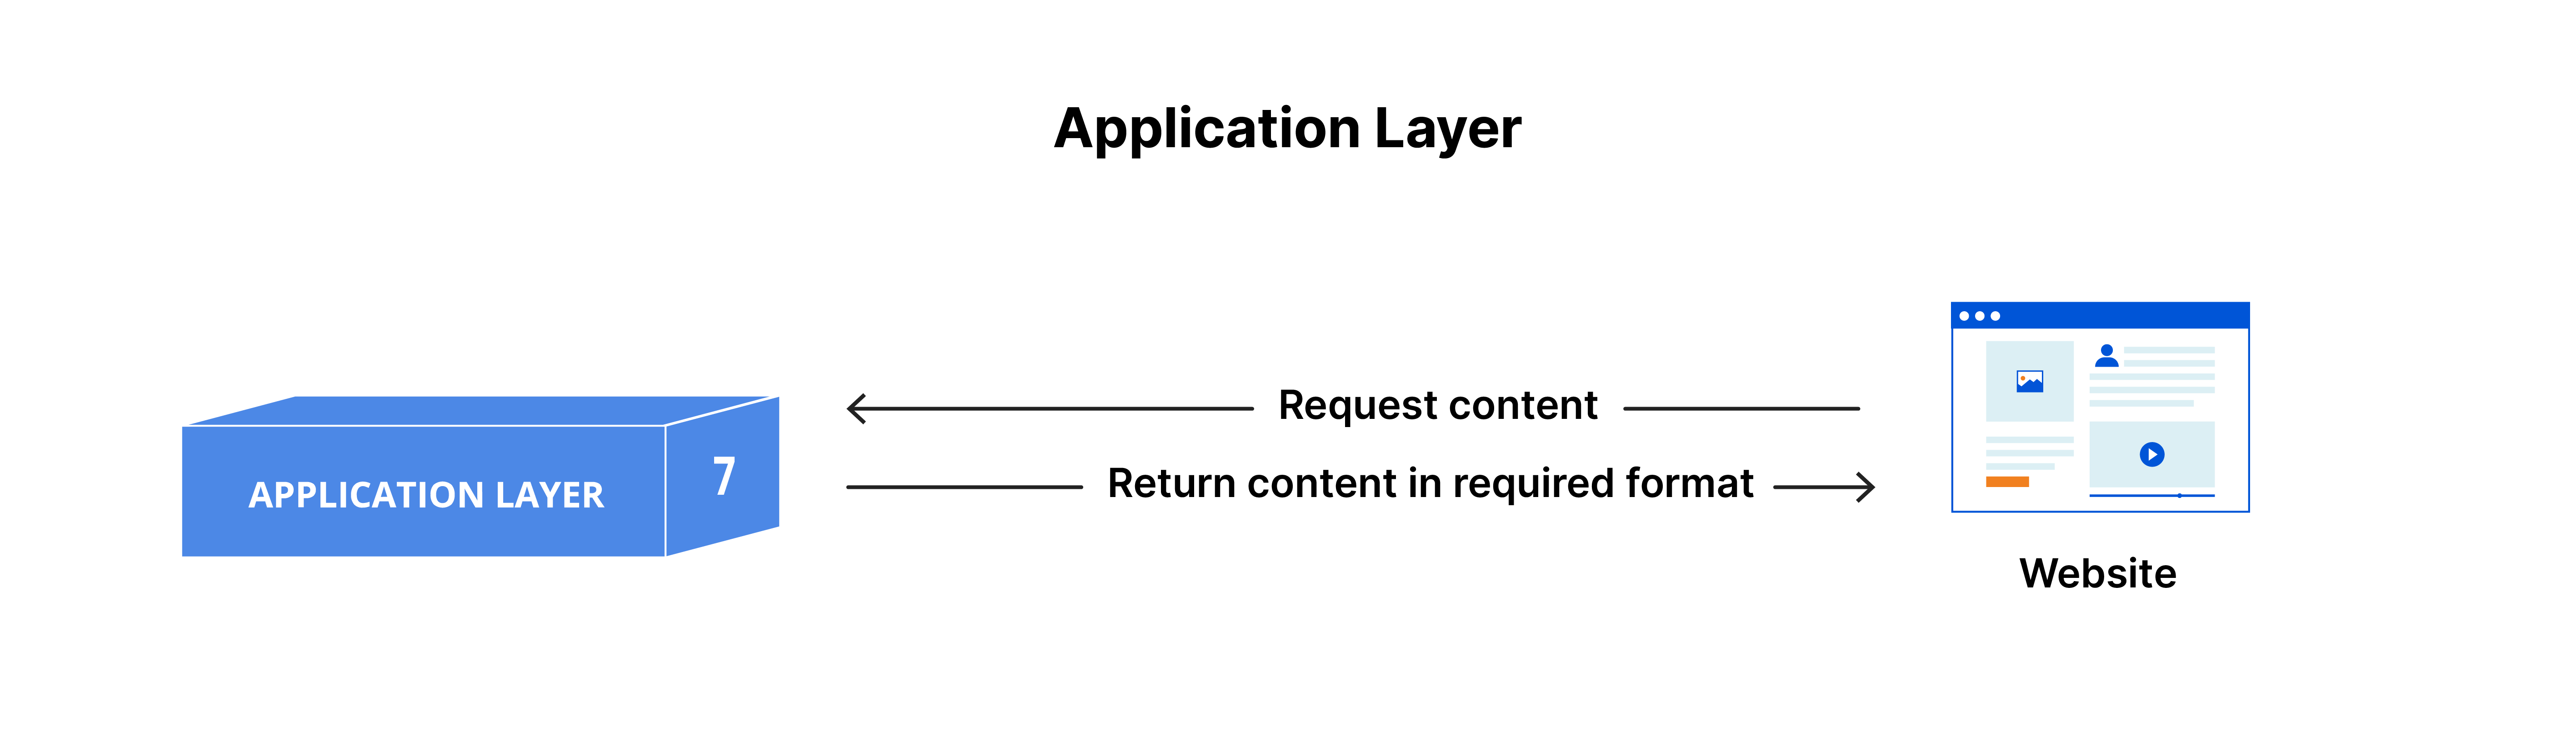 The Application Layer: content requested and returned in required format